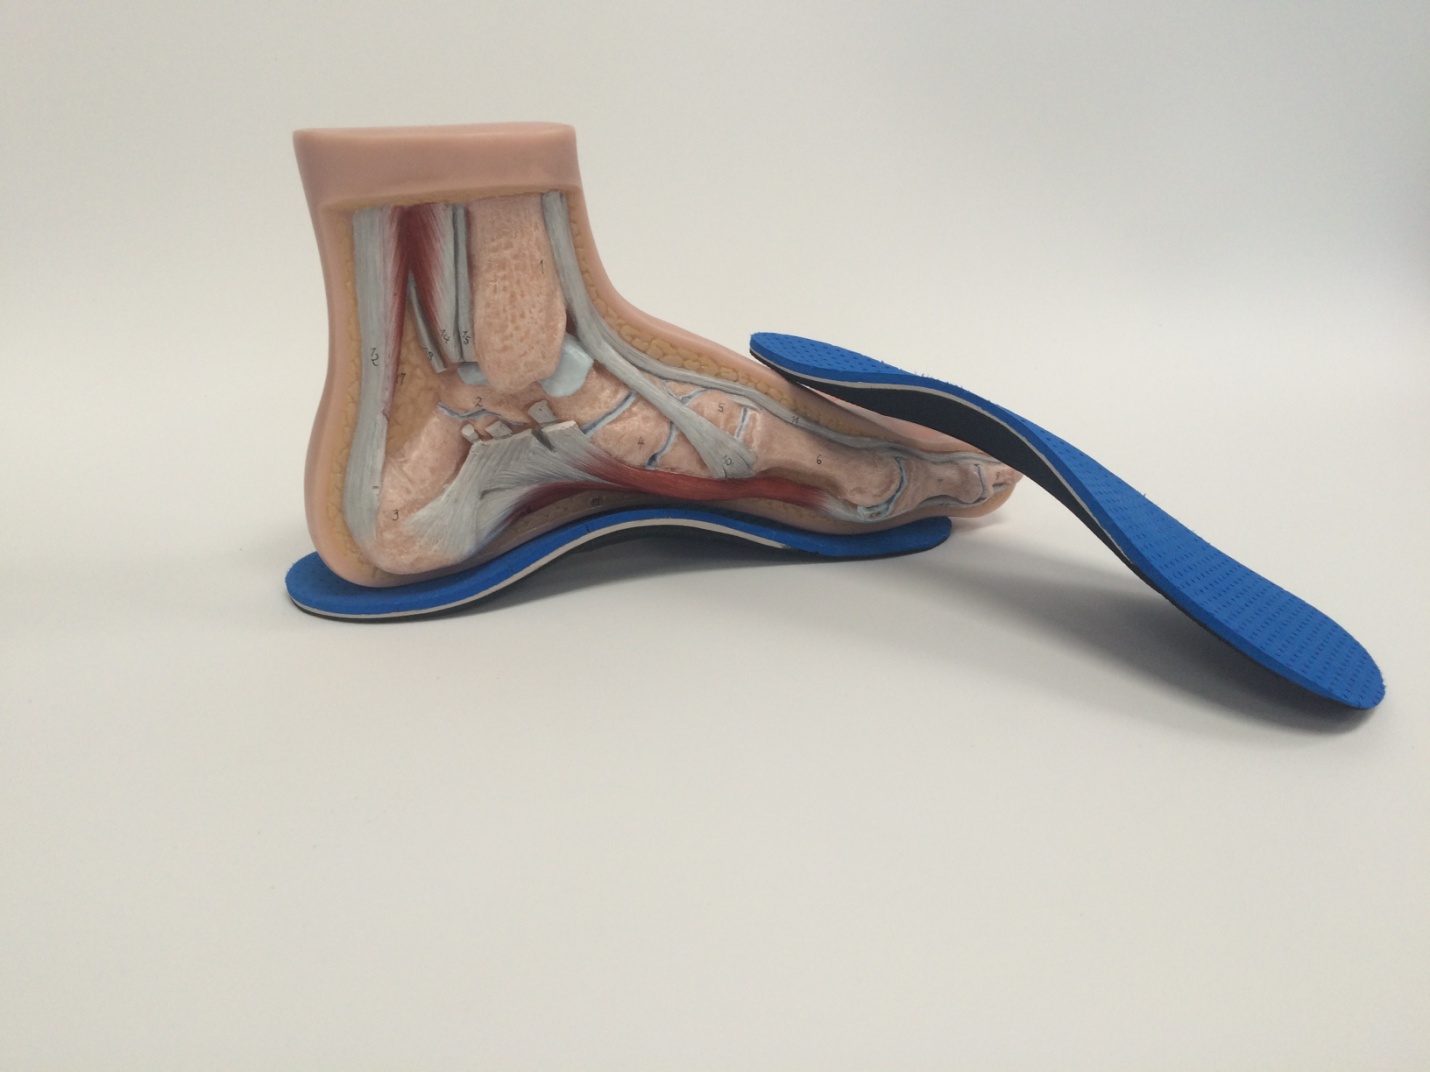 Reasons Why One Should Choose Customized Orthotics Over Generalized Ones